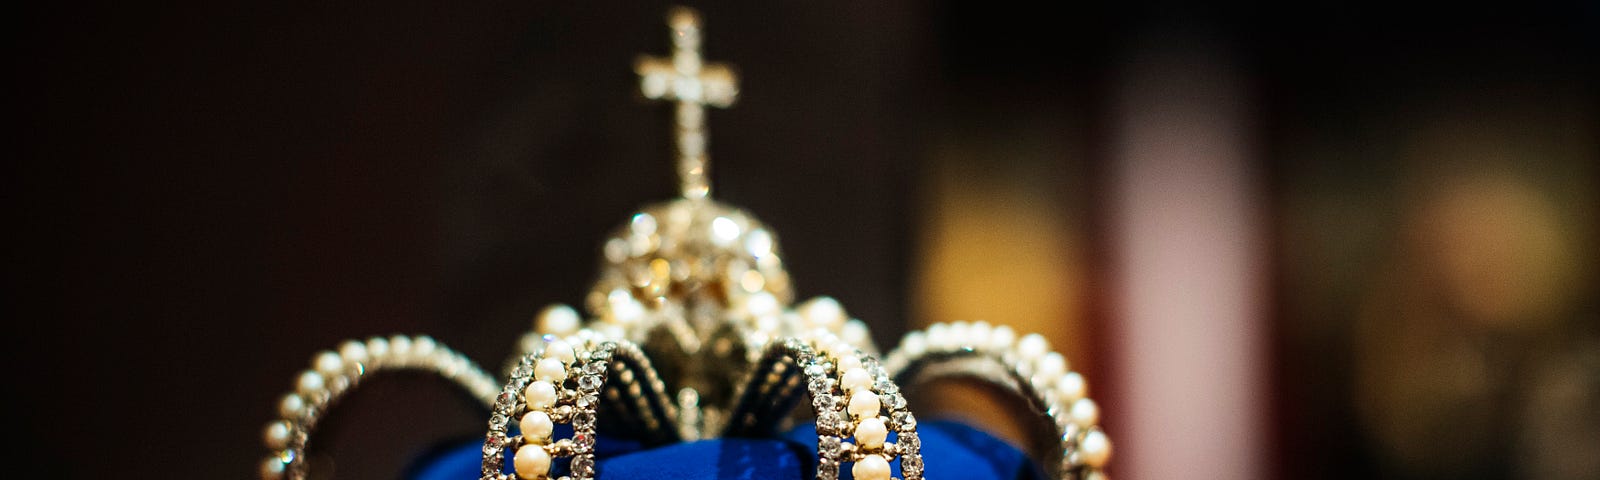 A crown made of pearls and diamonds over deep blue fabric with a crucifix on top sitting on a red pillow